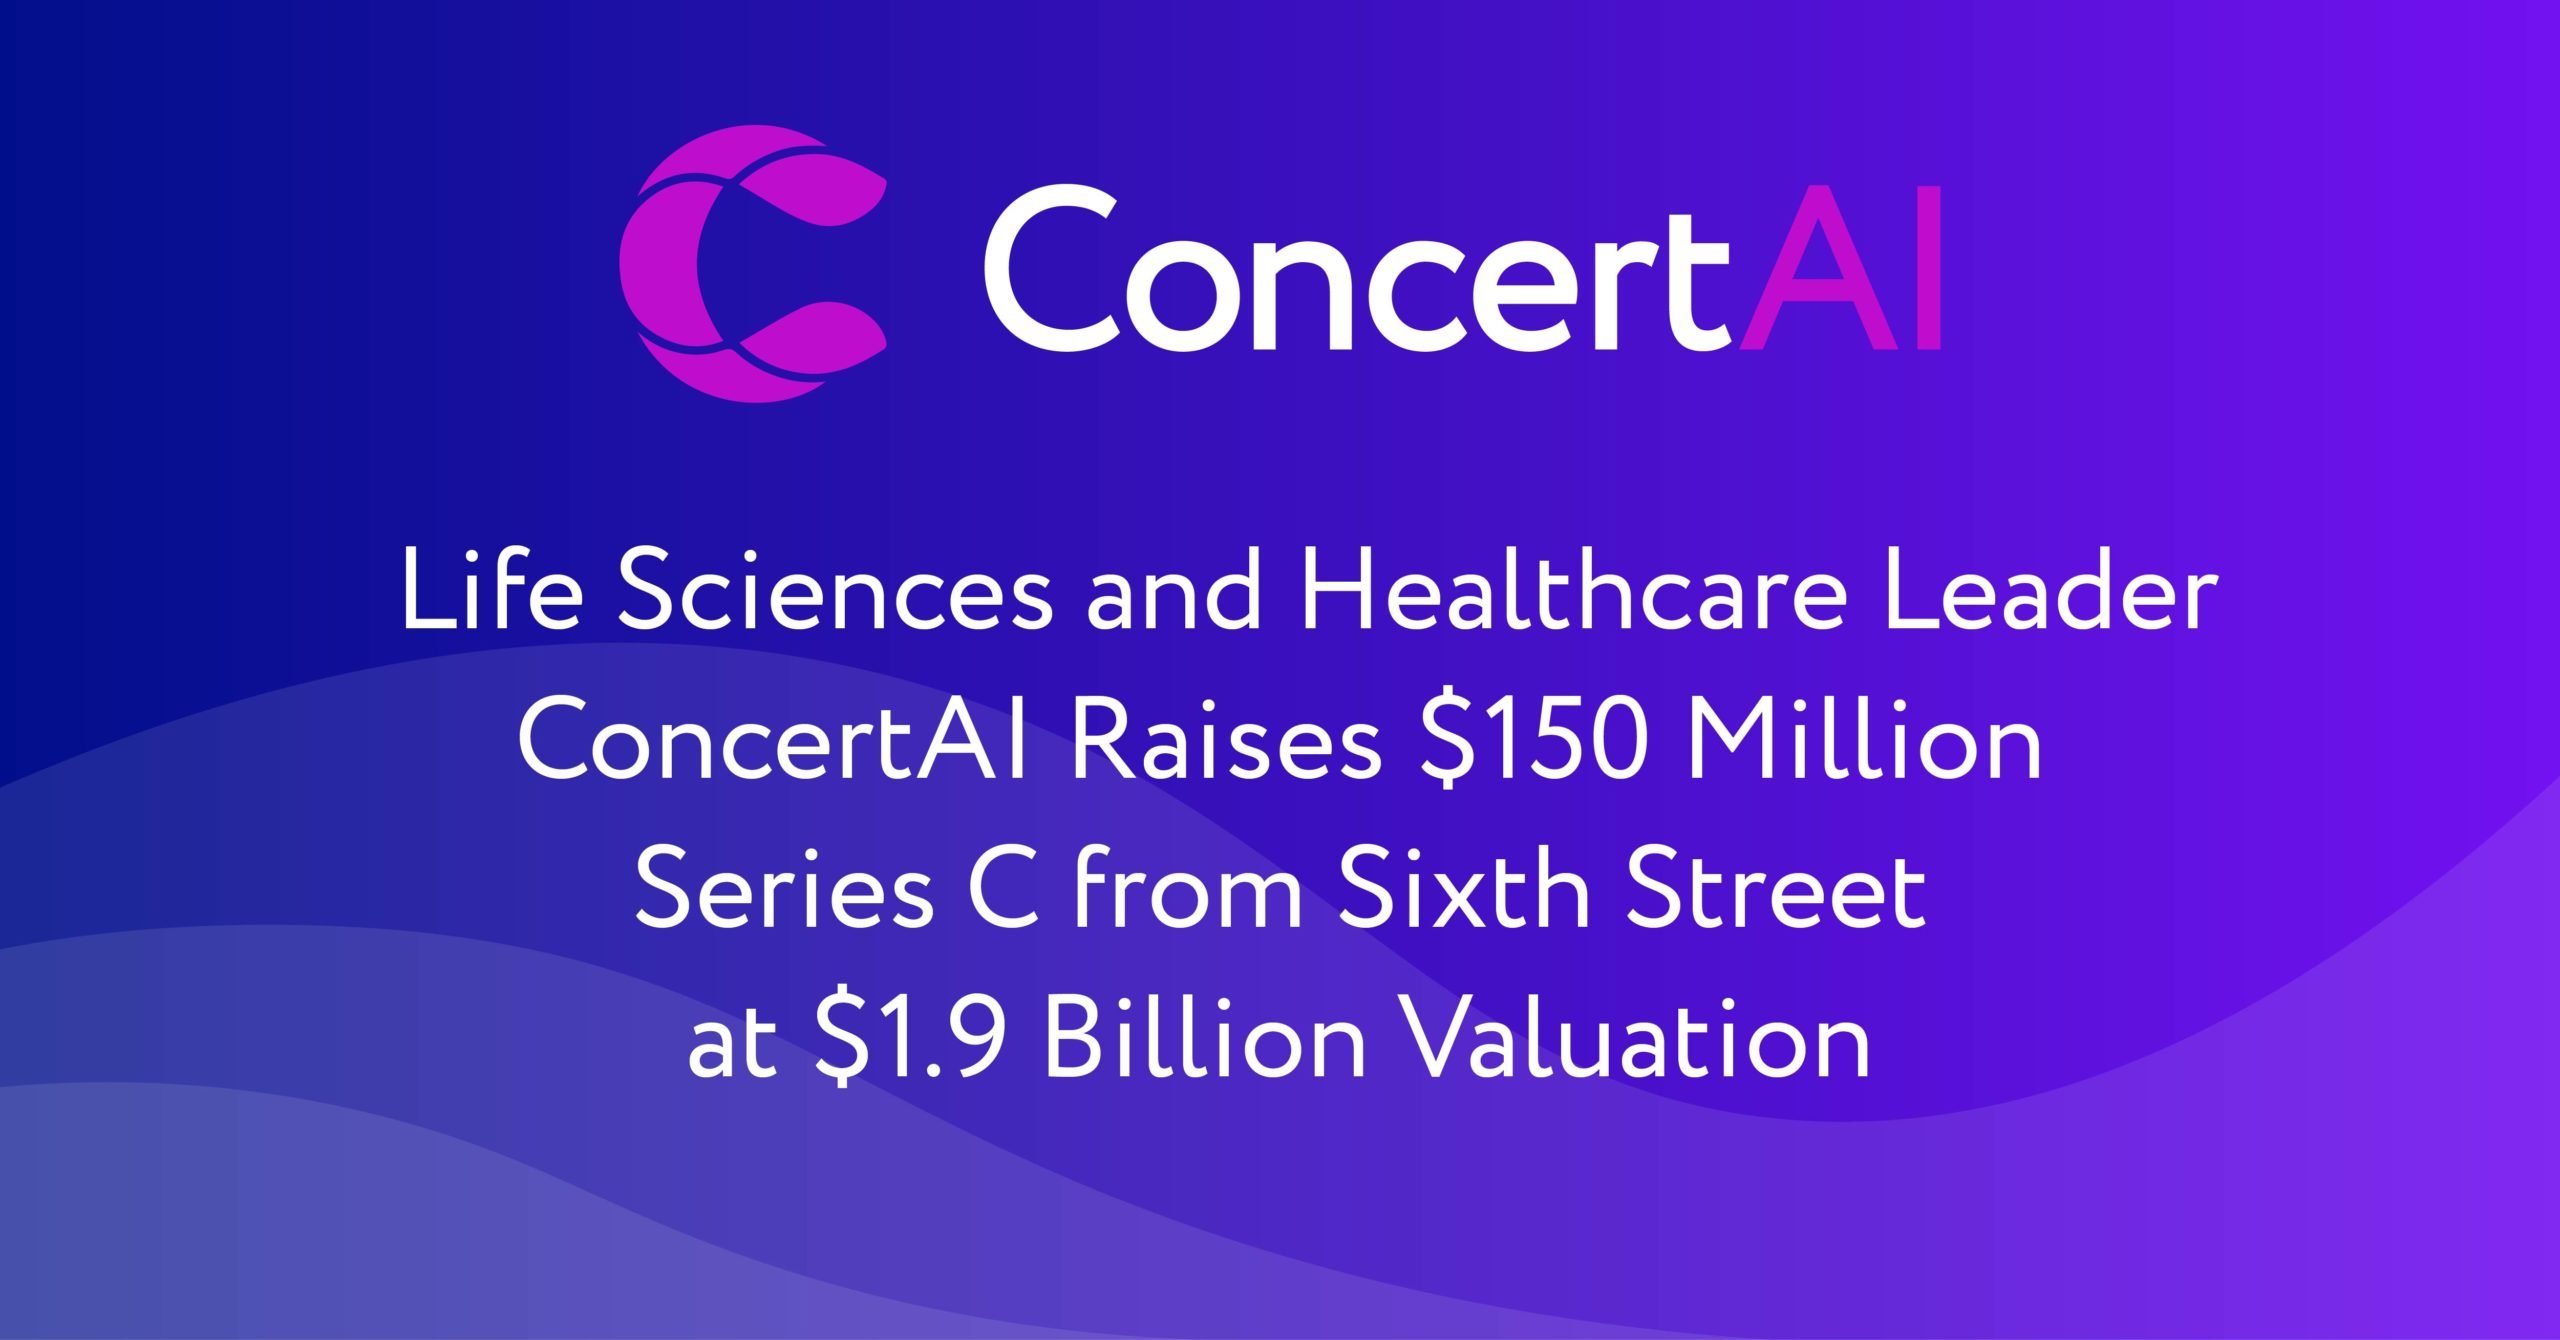 Life Sciences and Healthcare Leader ConcertAI Raises $150 Million Series C from Sixth Street at $1.9 Billion Valuation